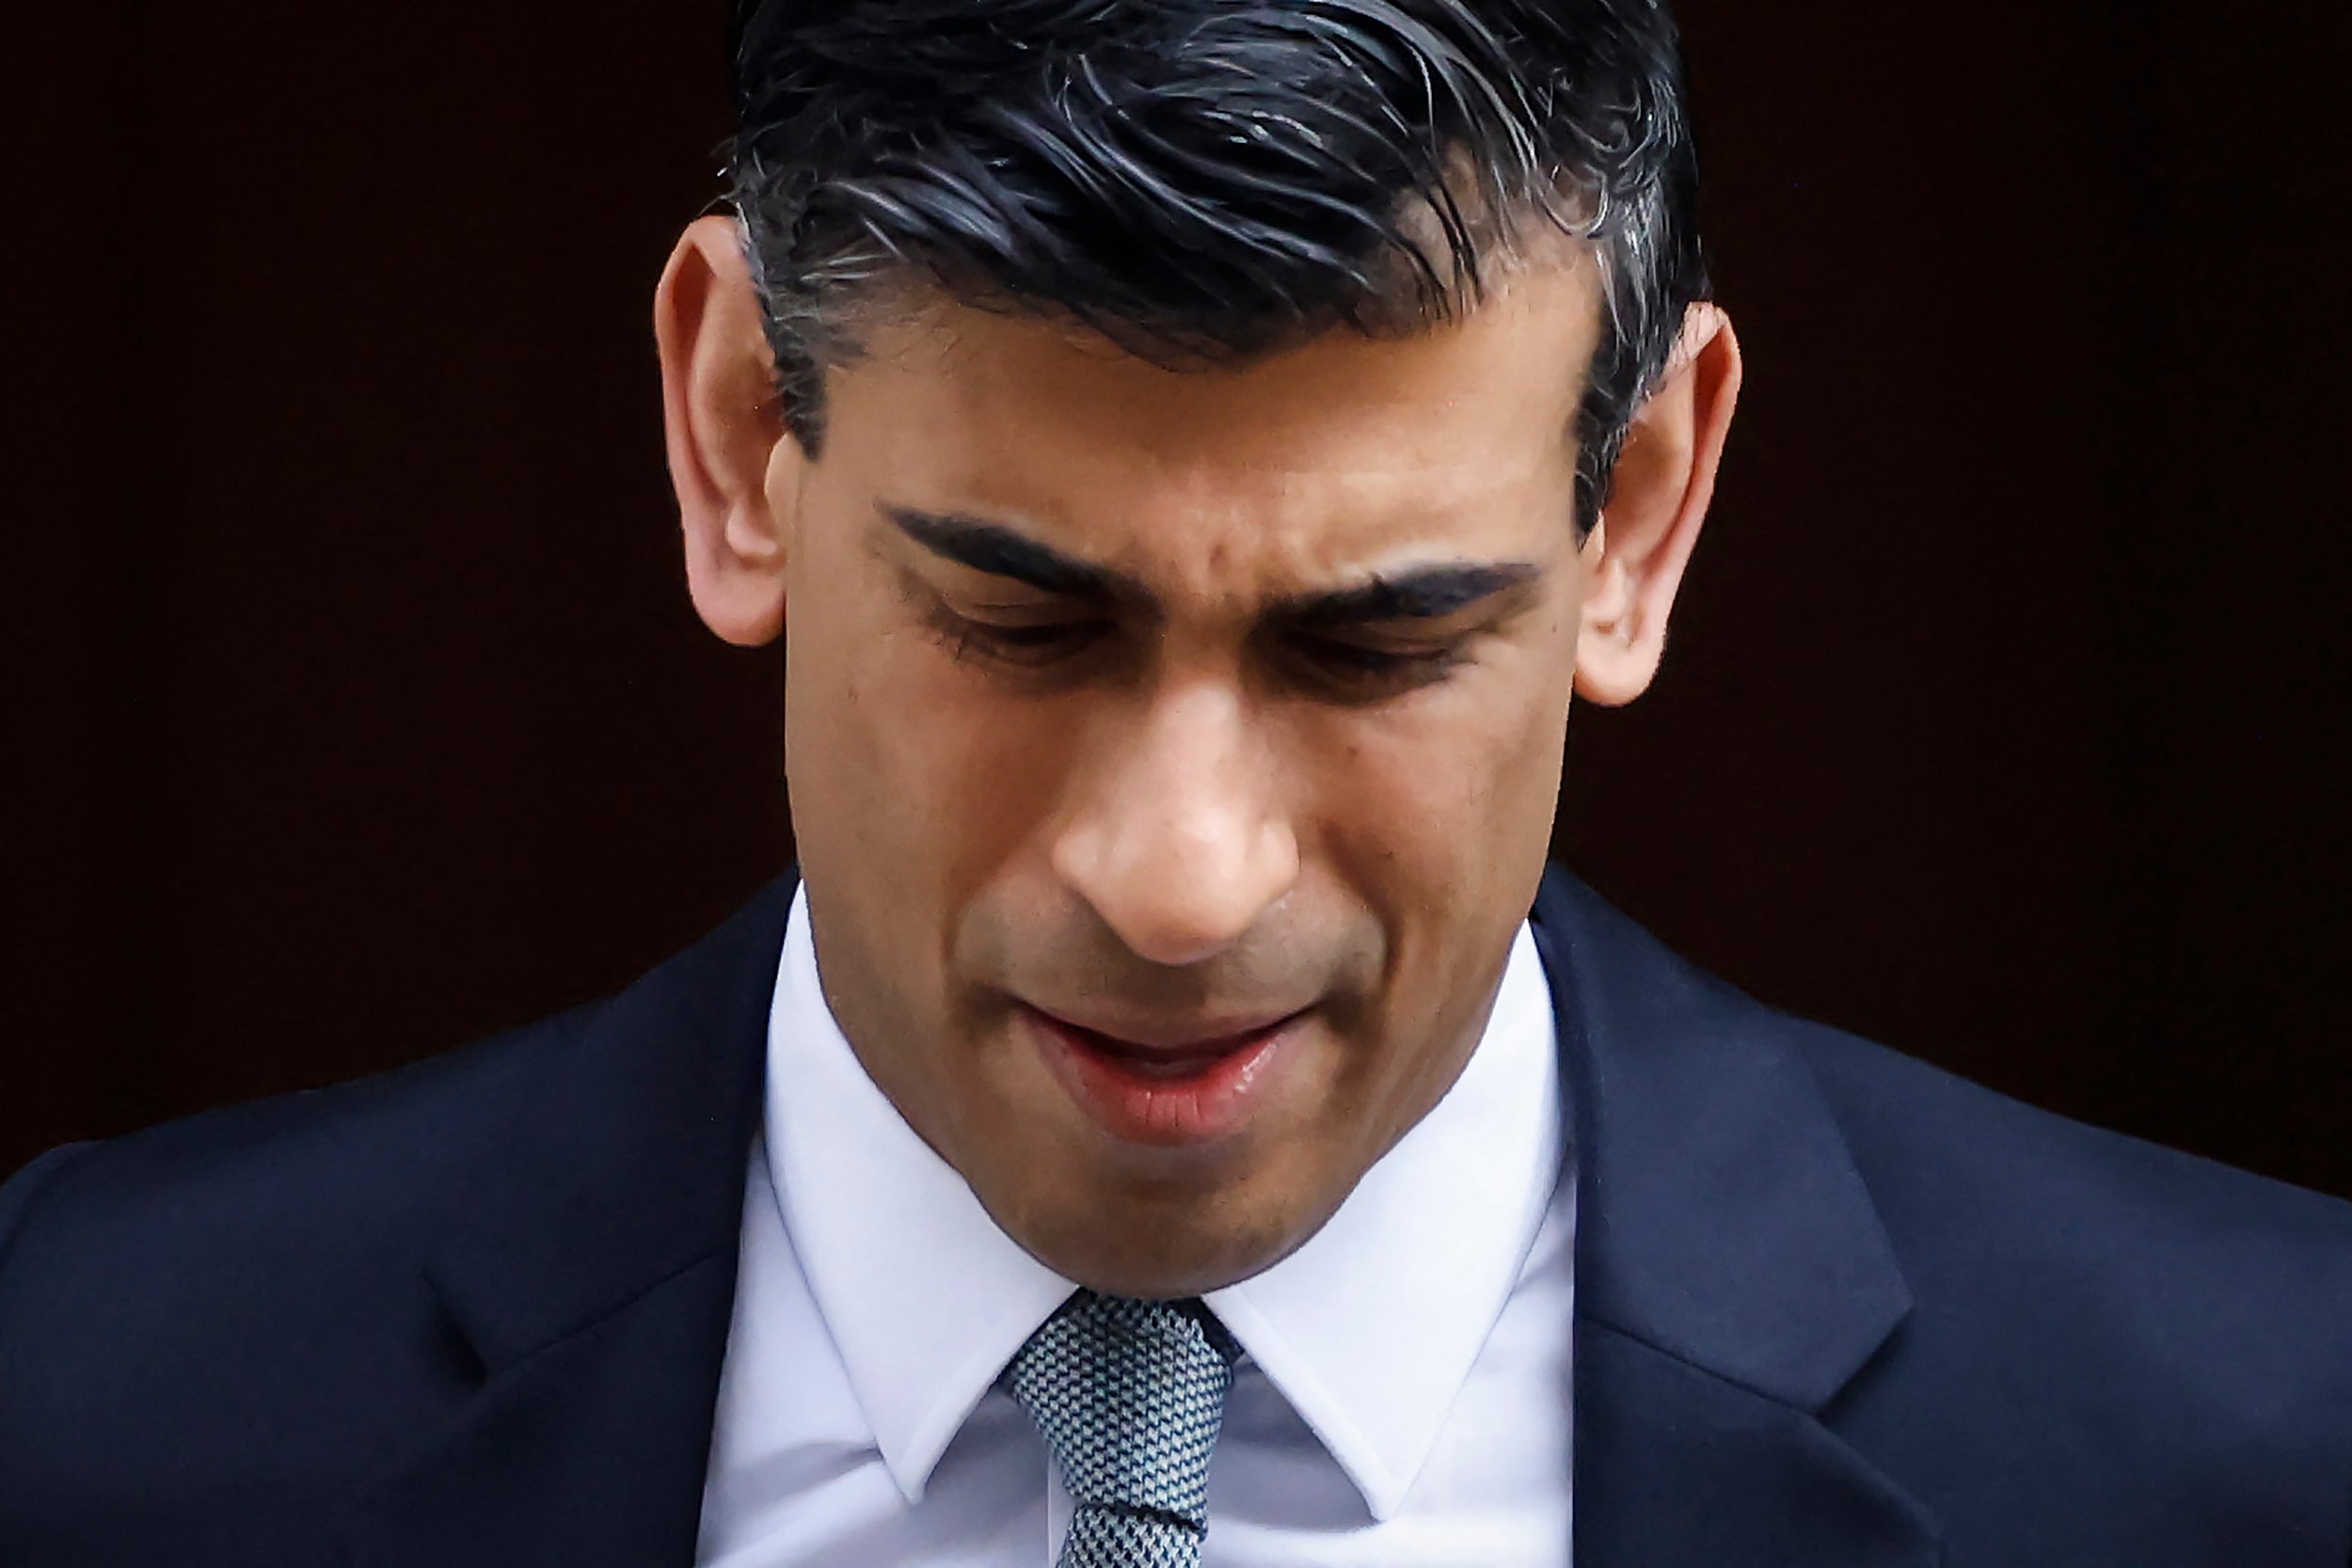 Rishi Sunak has been criticised for not doing enough to tackle soaring bills